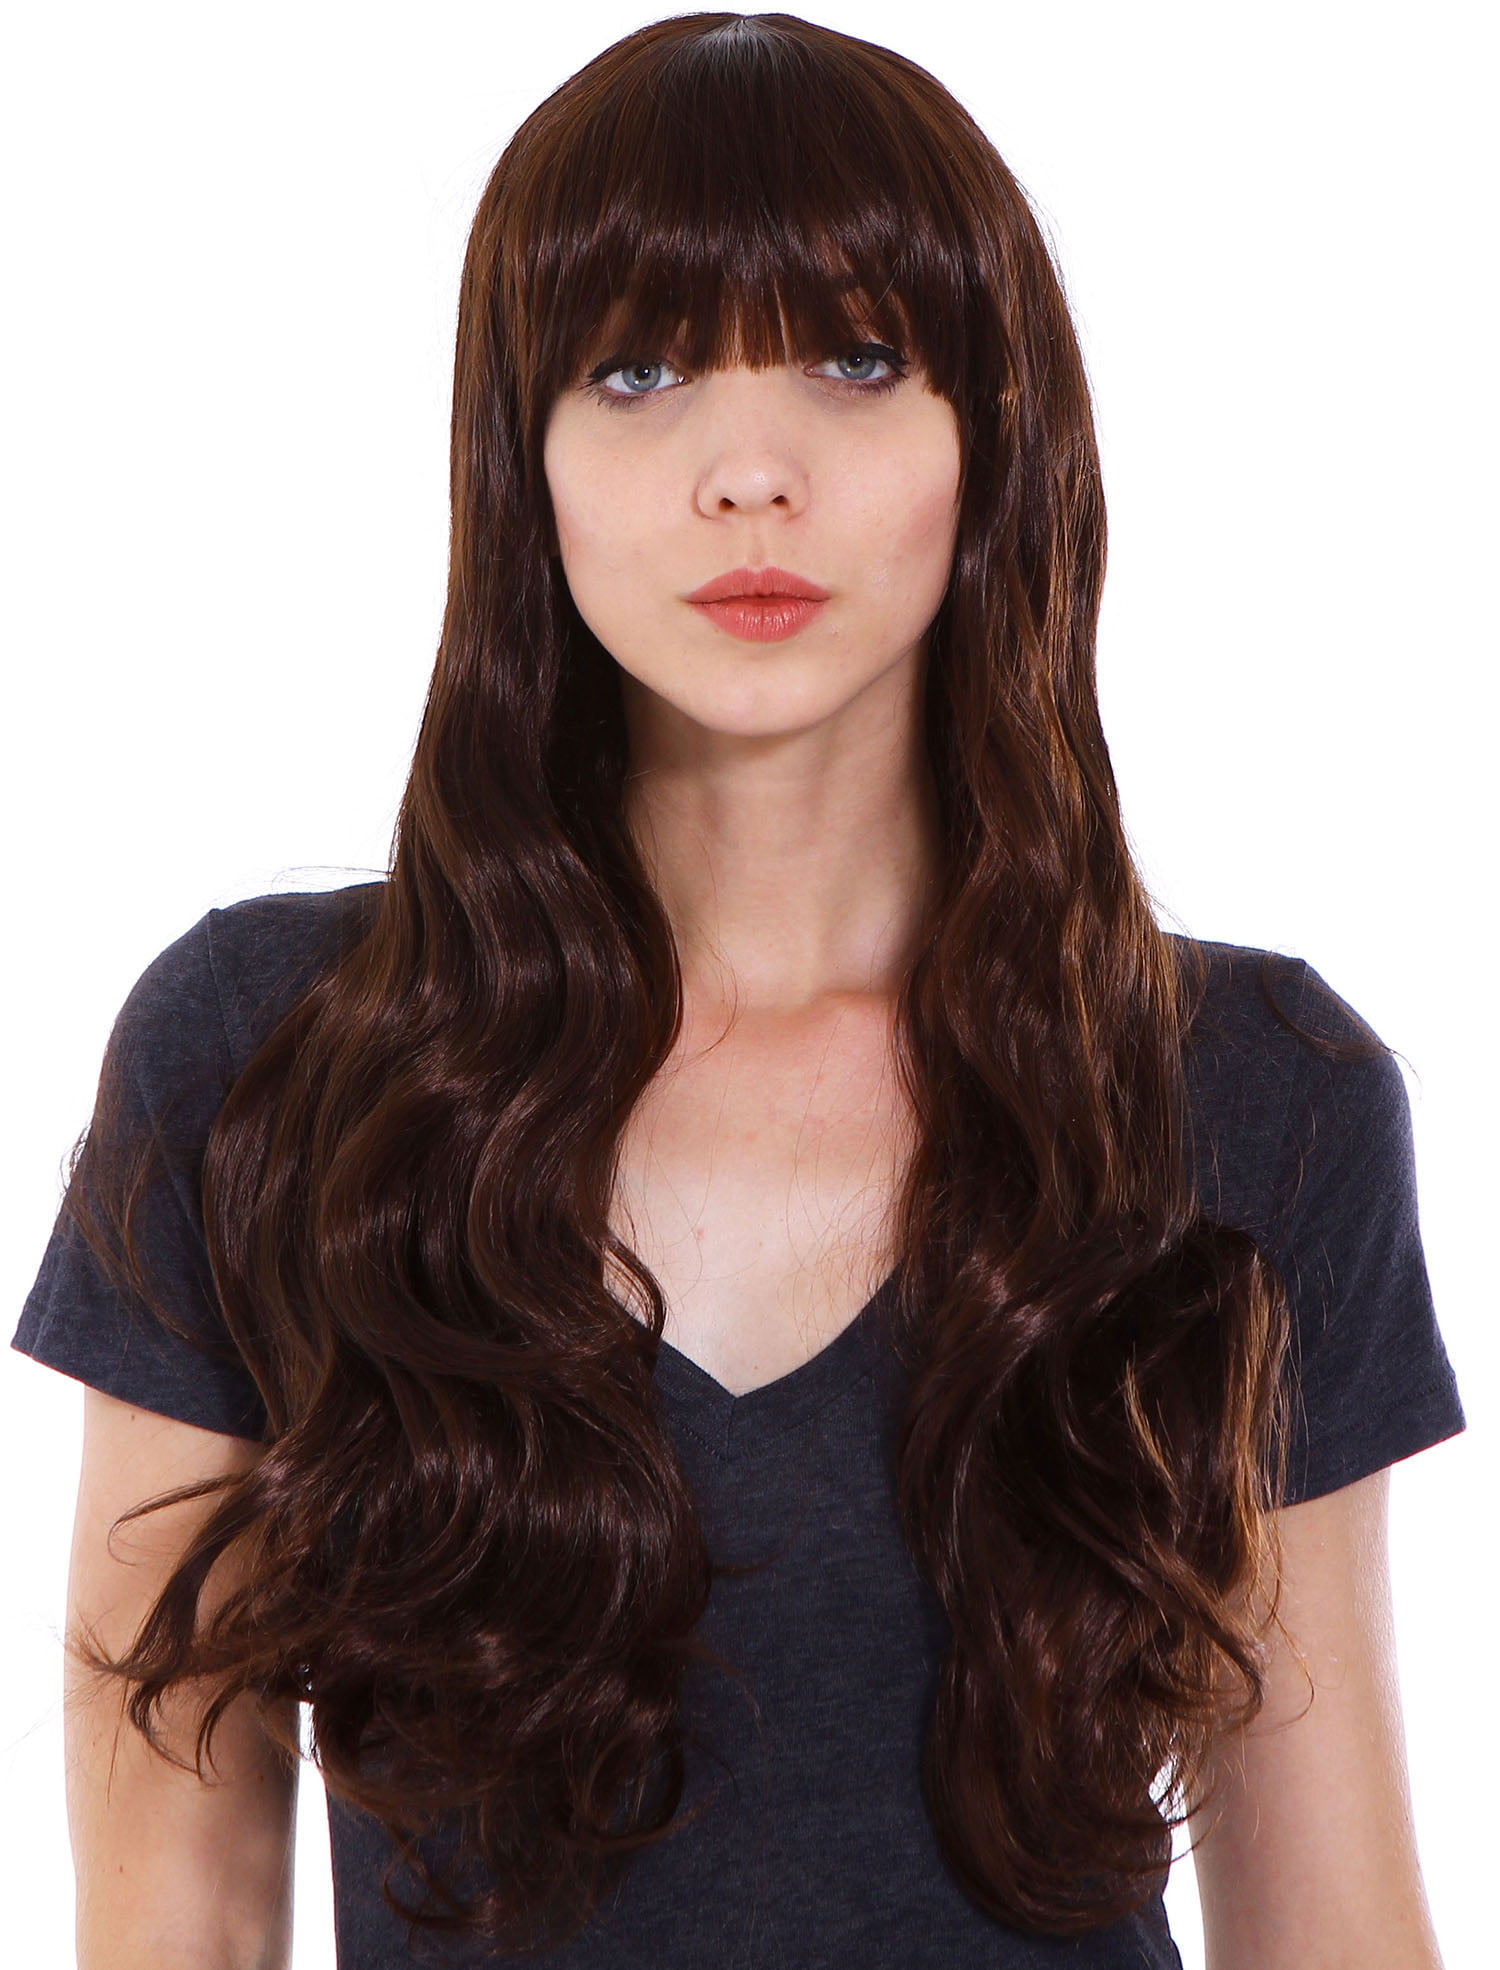 Simplicity Women S Sexy Long Curly Wavy Party Cosplay Full Hair Wig